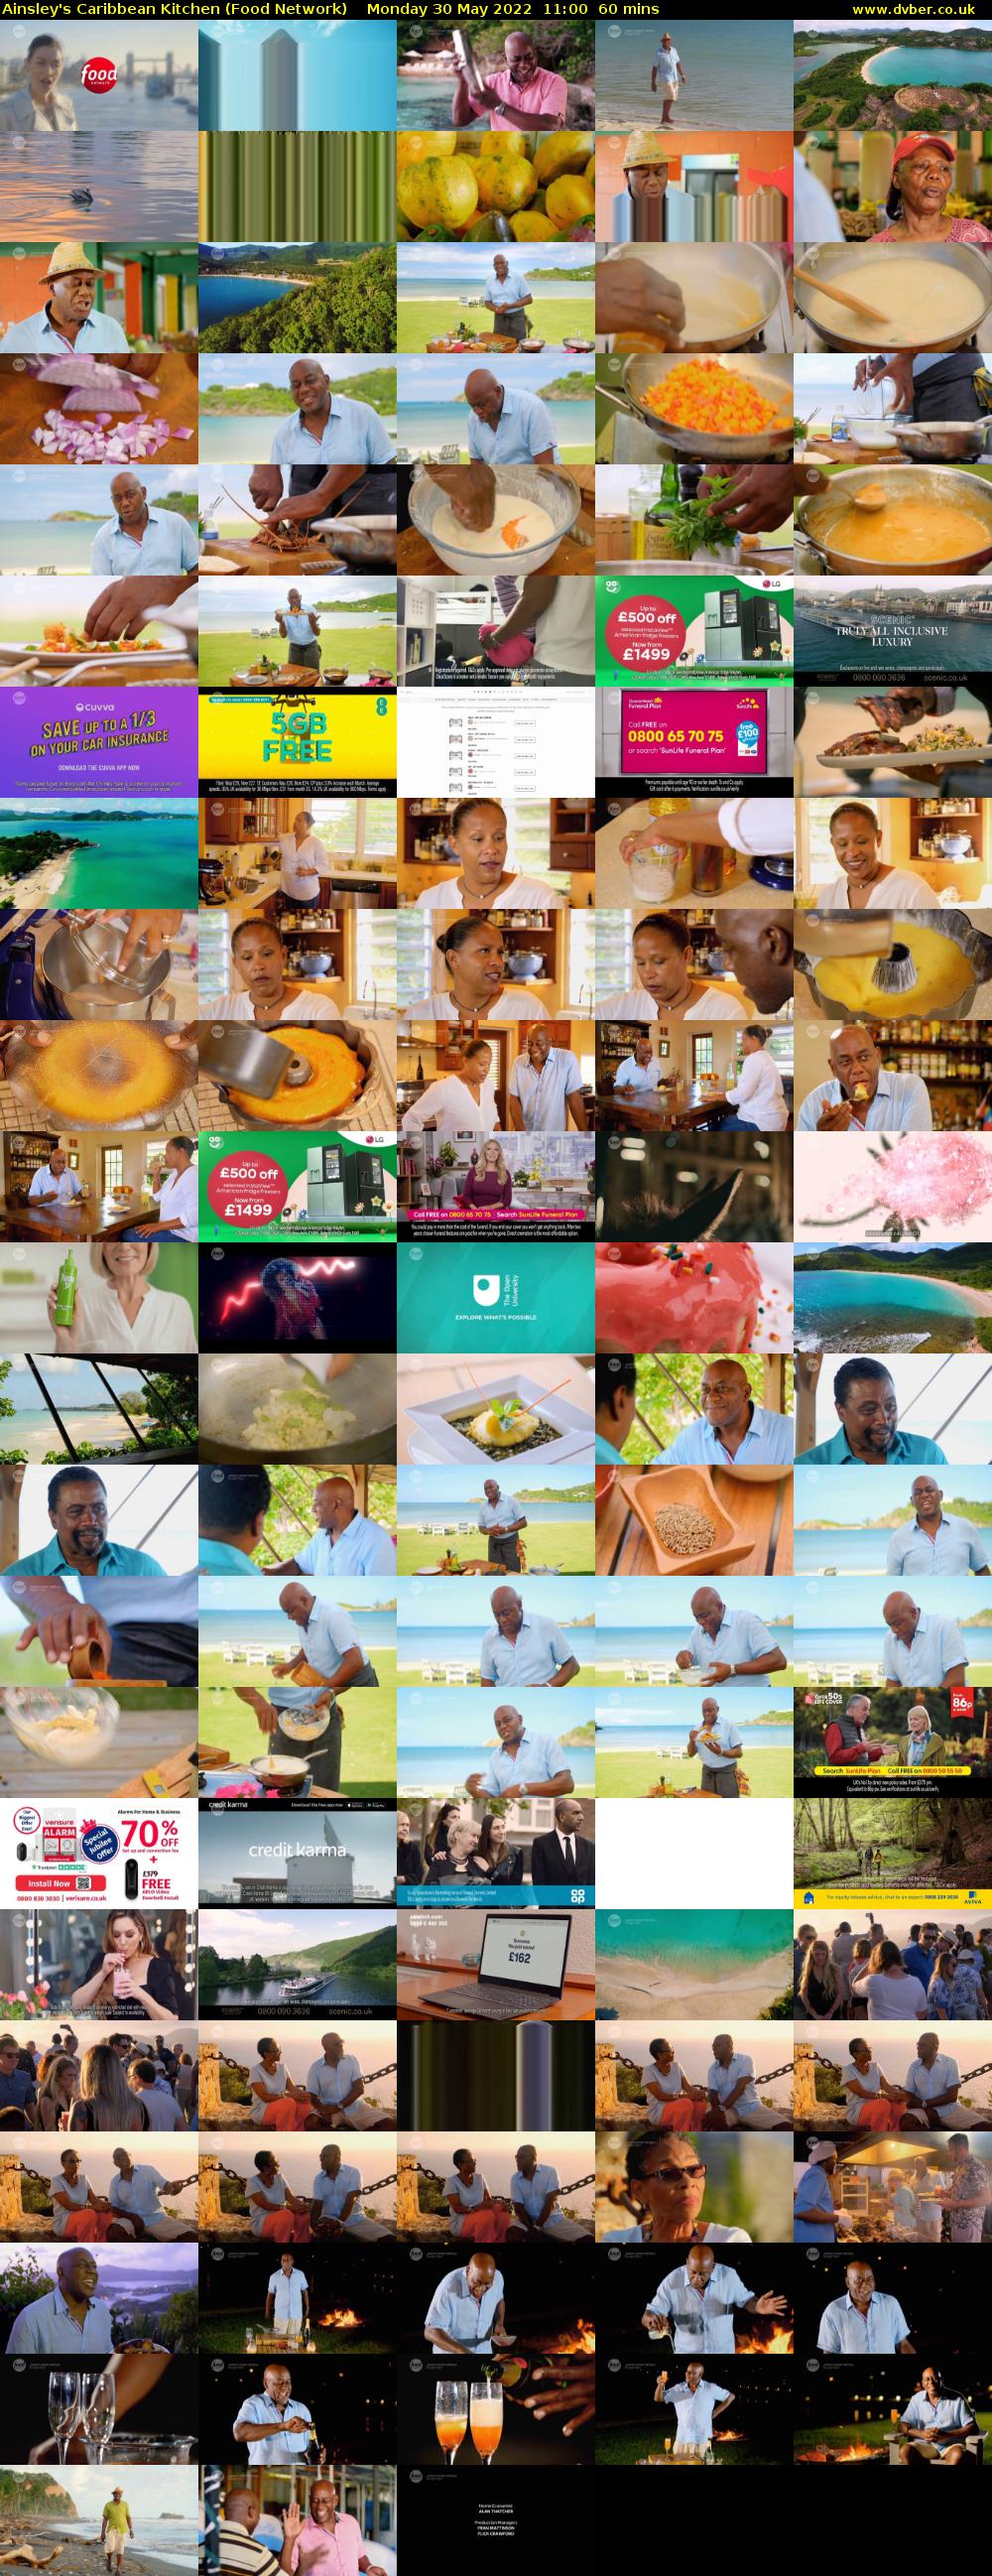 Ainsley's Caribbean Kitchen (Food Network) Monday 30 May 2022 11:00 - 12:00